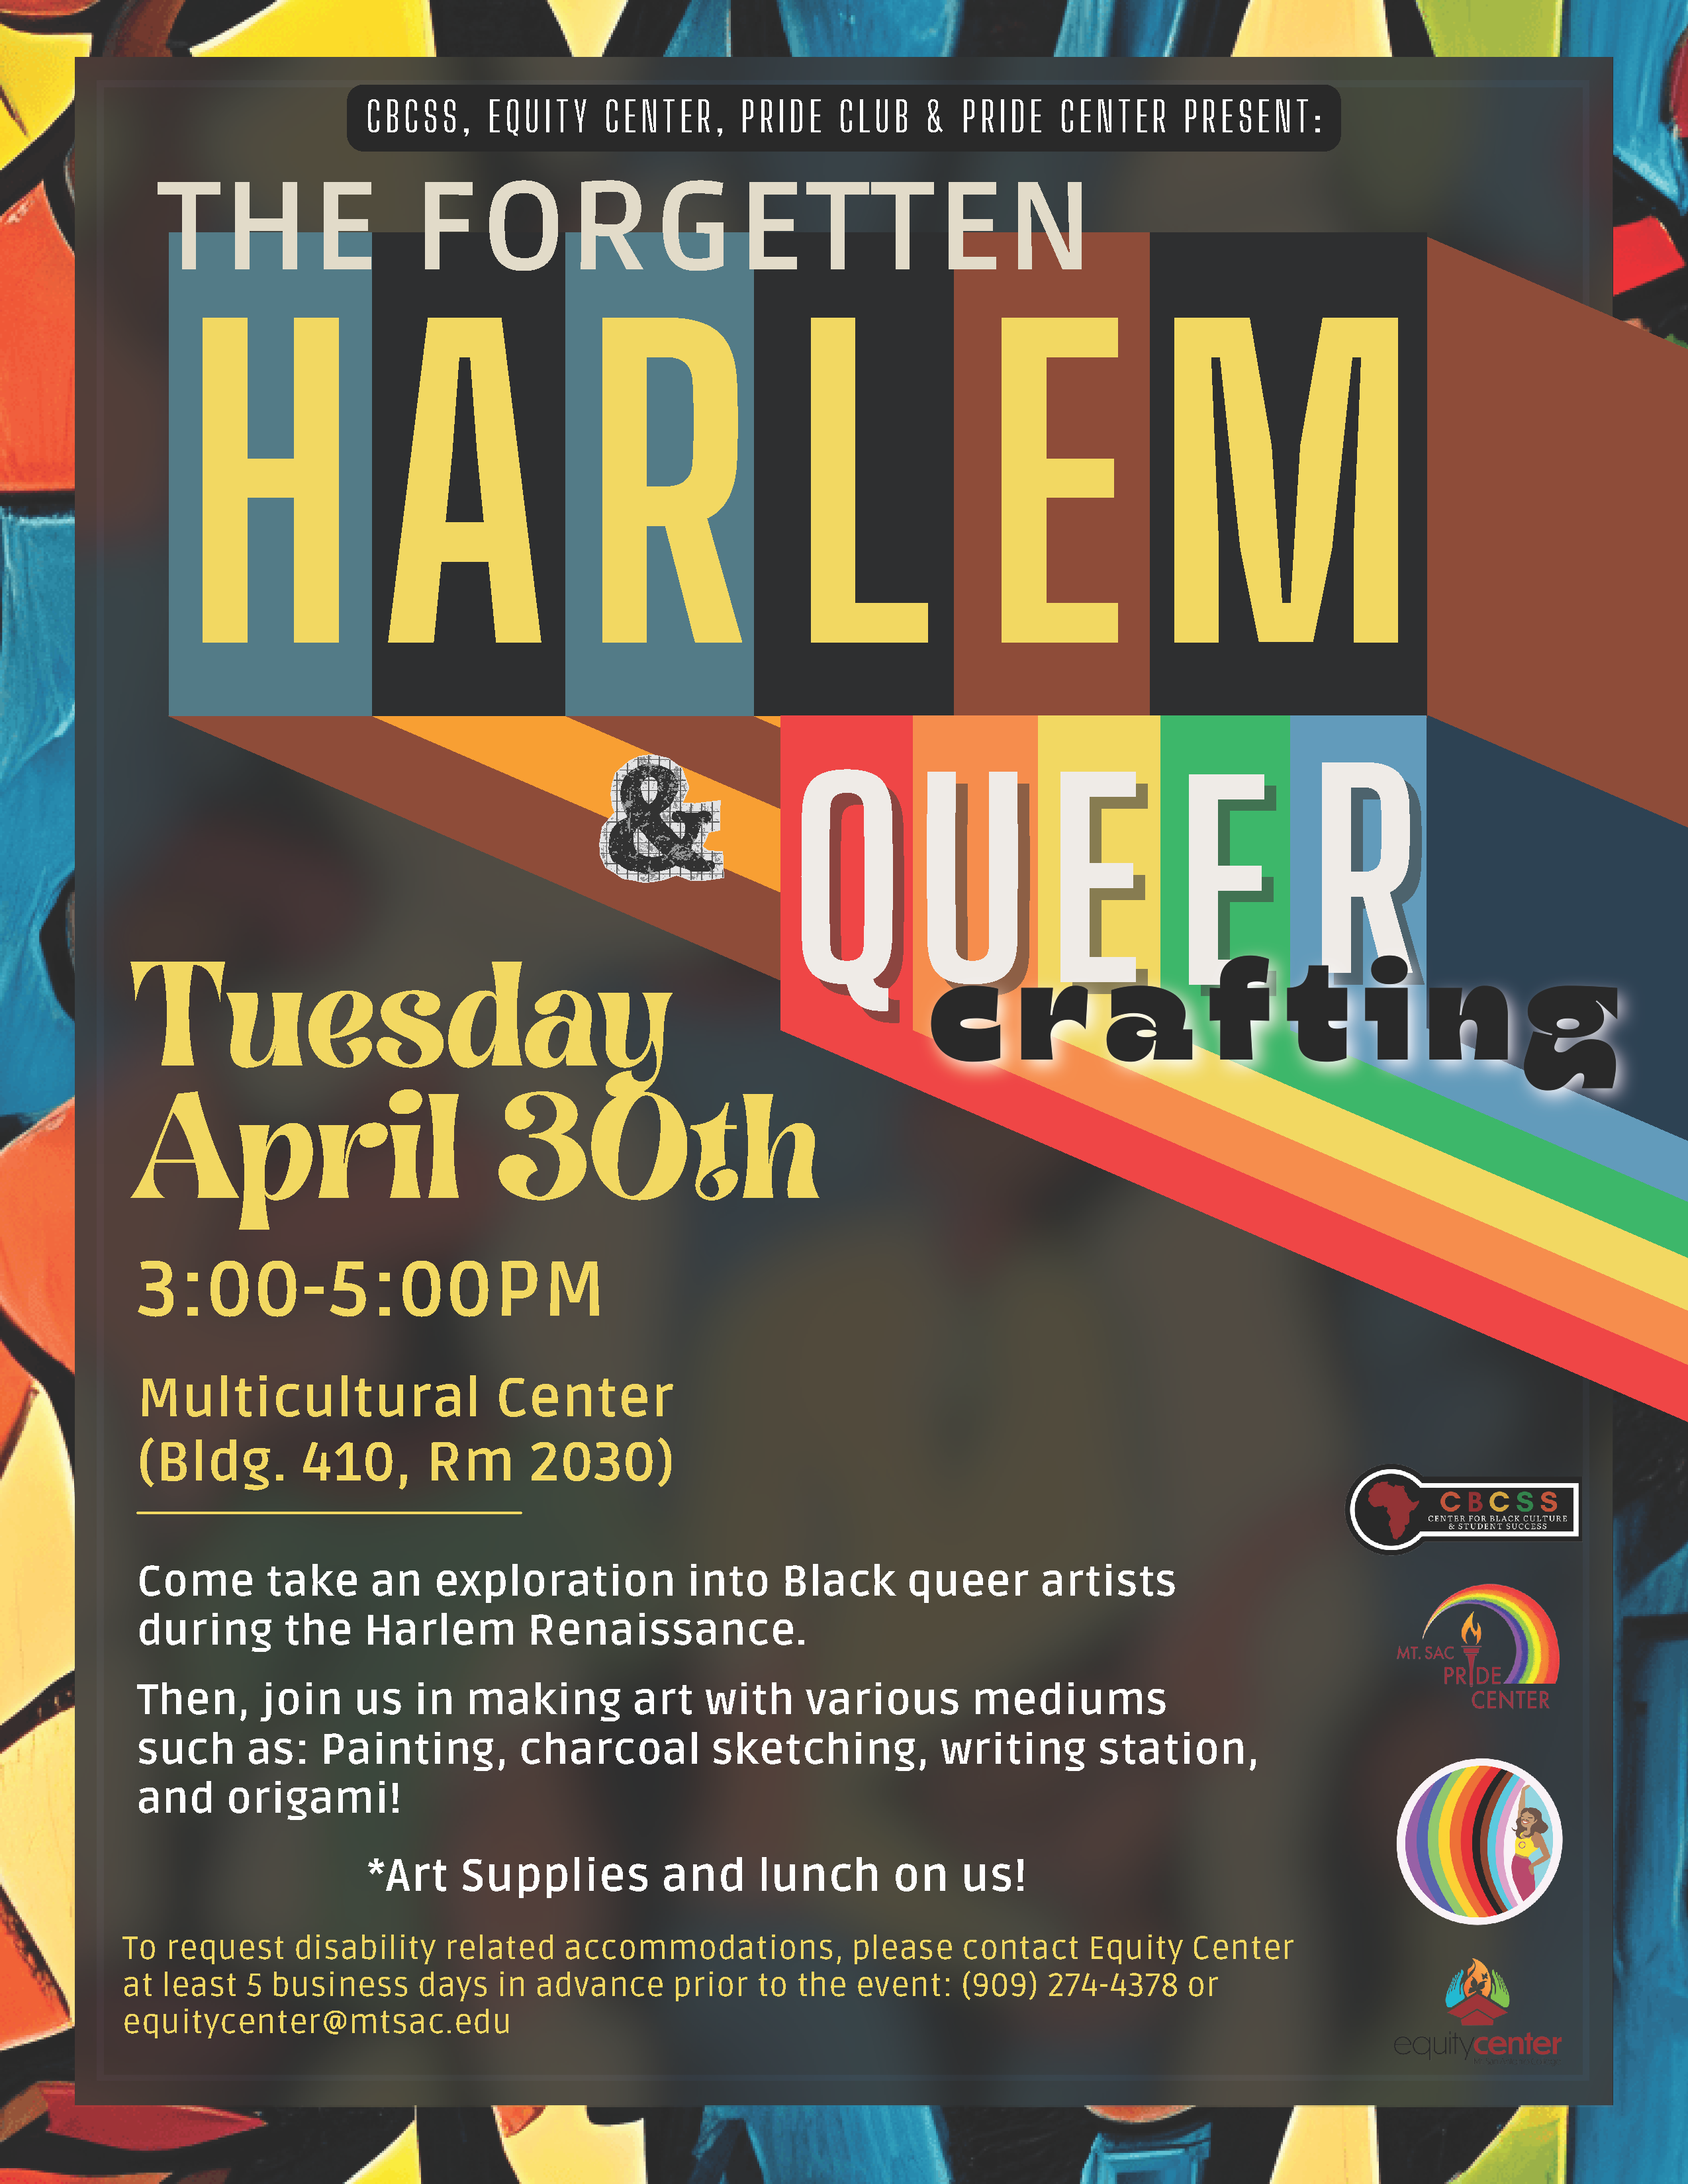 harlem and queer crafting